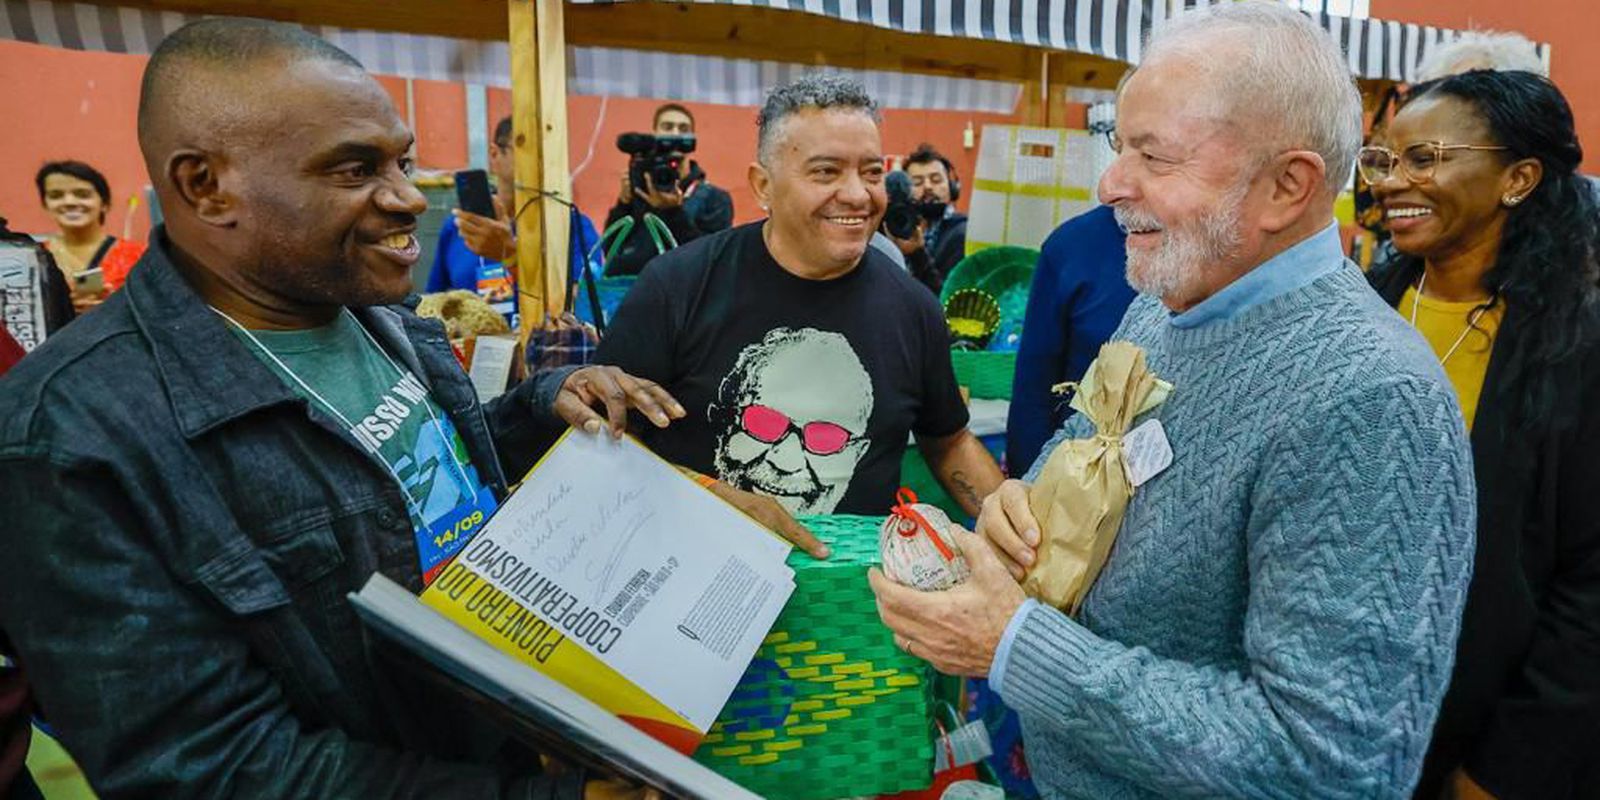 Lula says the state needs to invest to diversify the economy